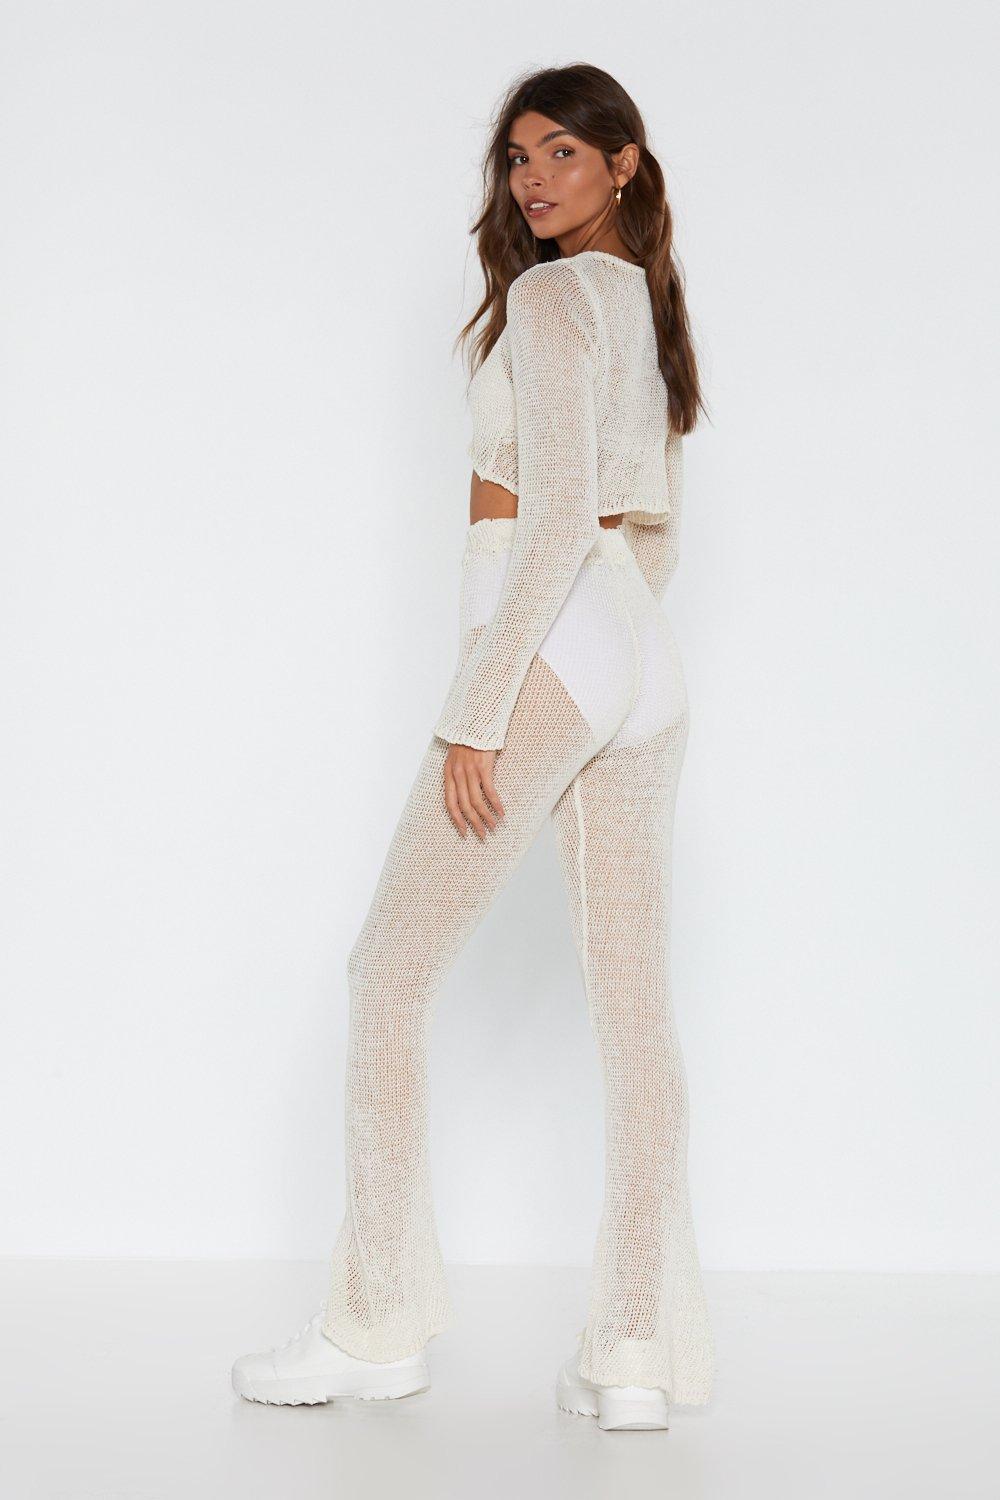 White Lace Sheer Flare Leg Trousers